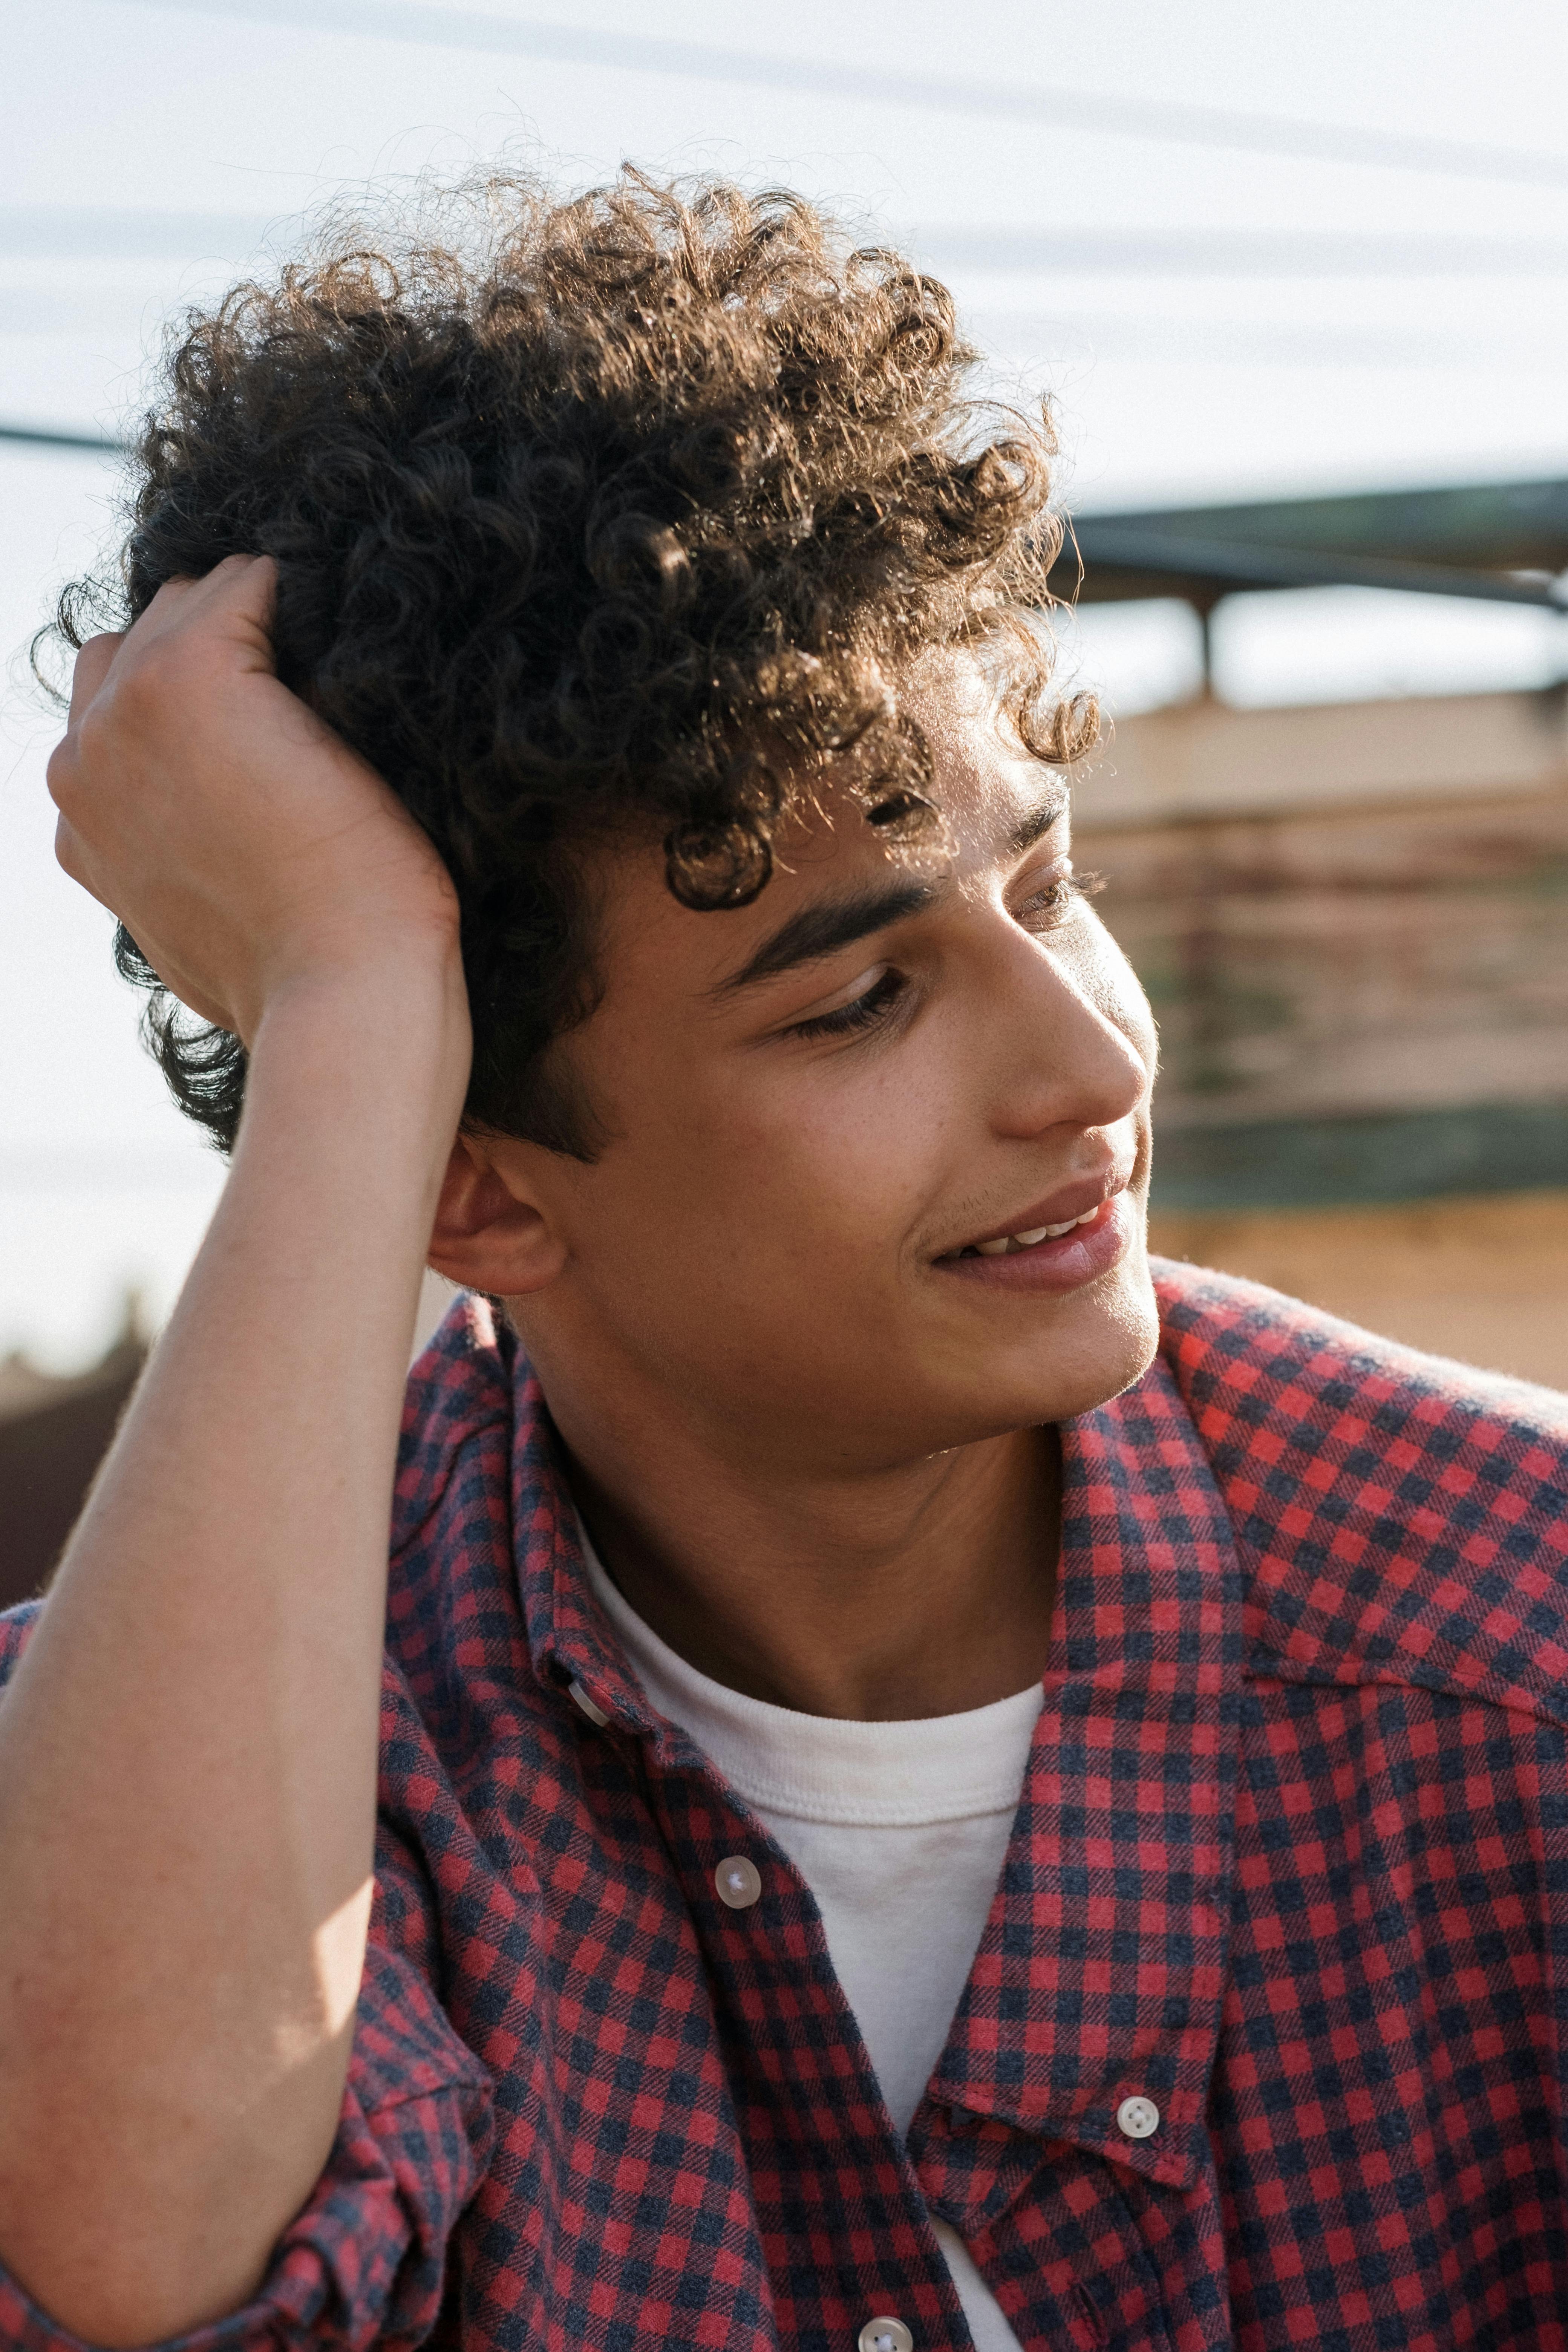 Portrait of teenage boy with curly hair · Free Stock Photo